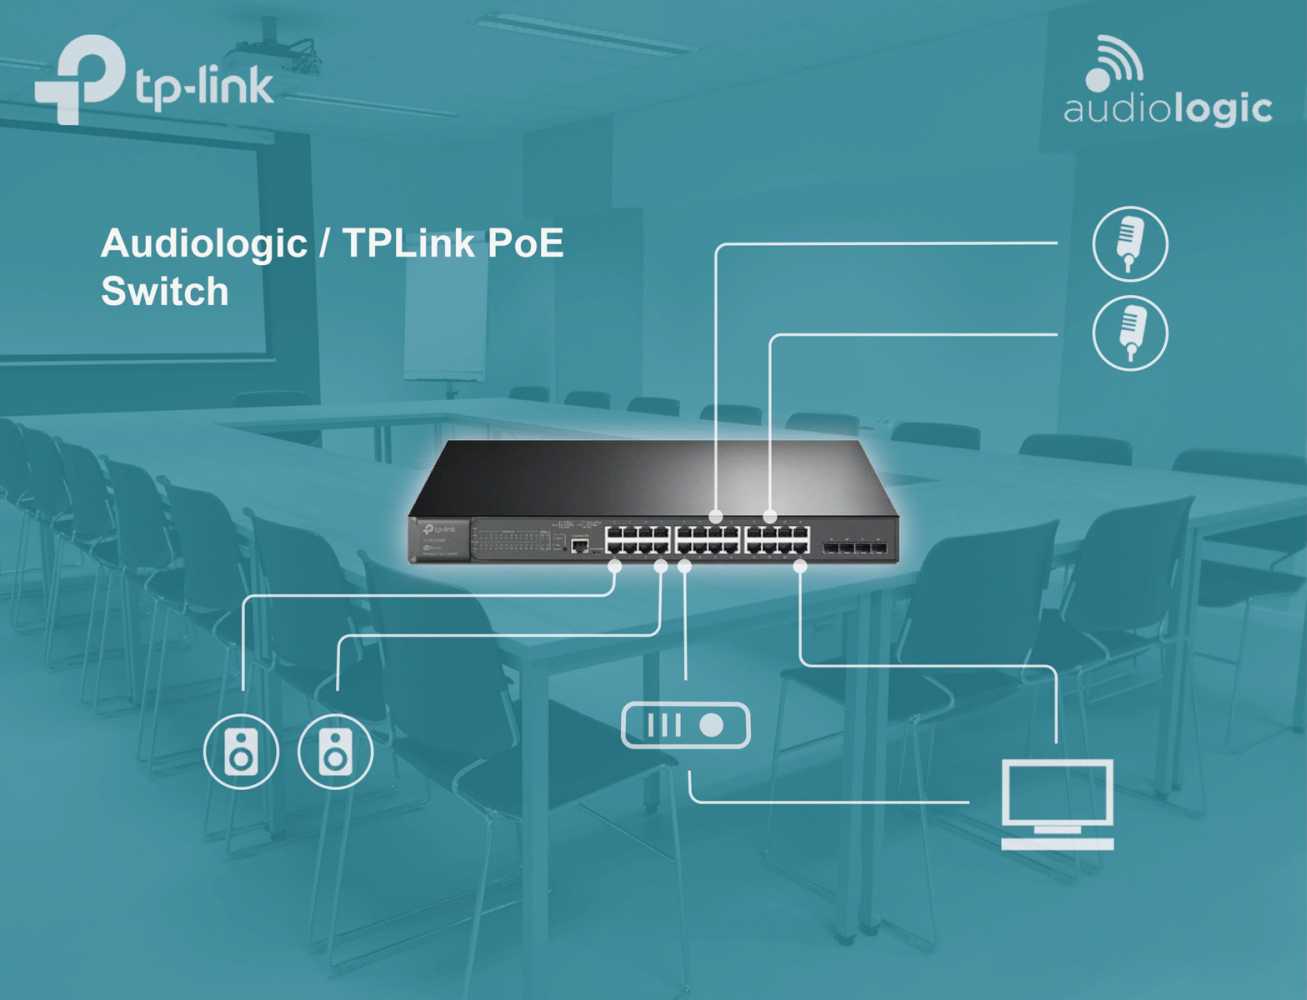 The network solution offers a way of making networking plug and play